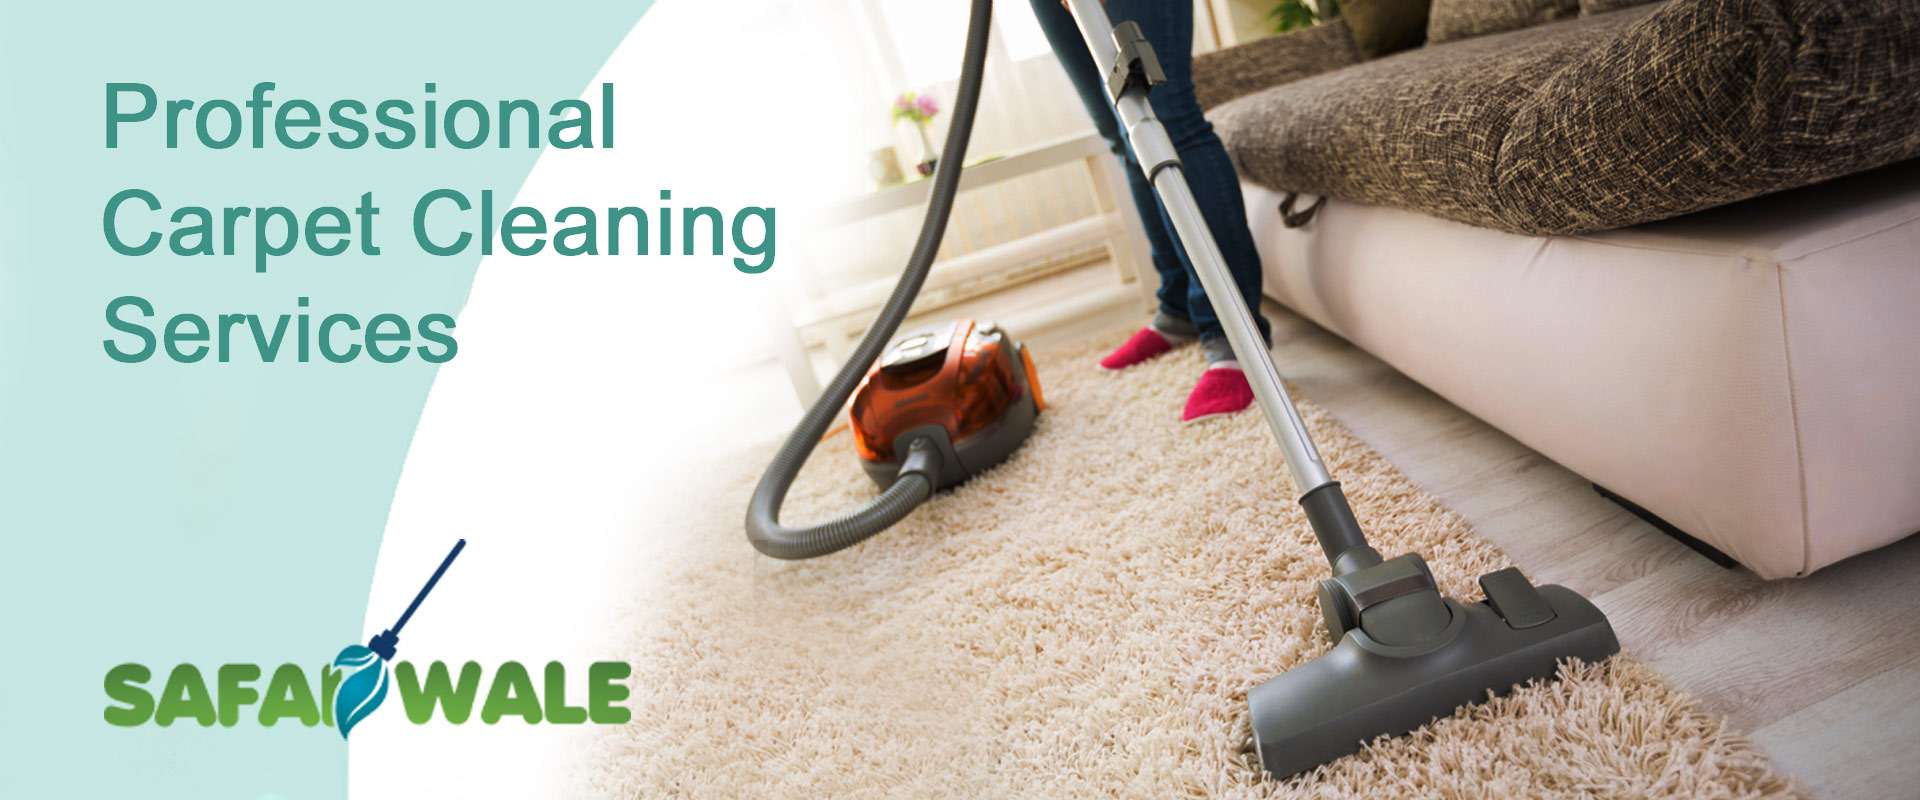 Carpet Cleaning Services In Bhiwandi Industrial Area, Thane